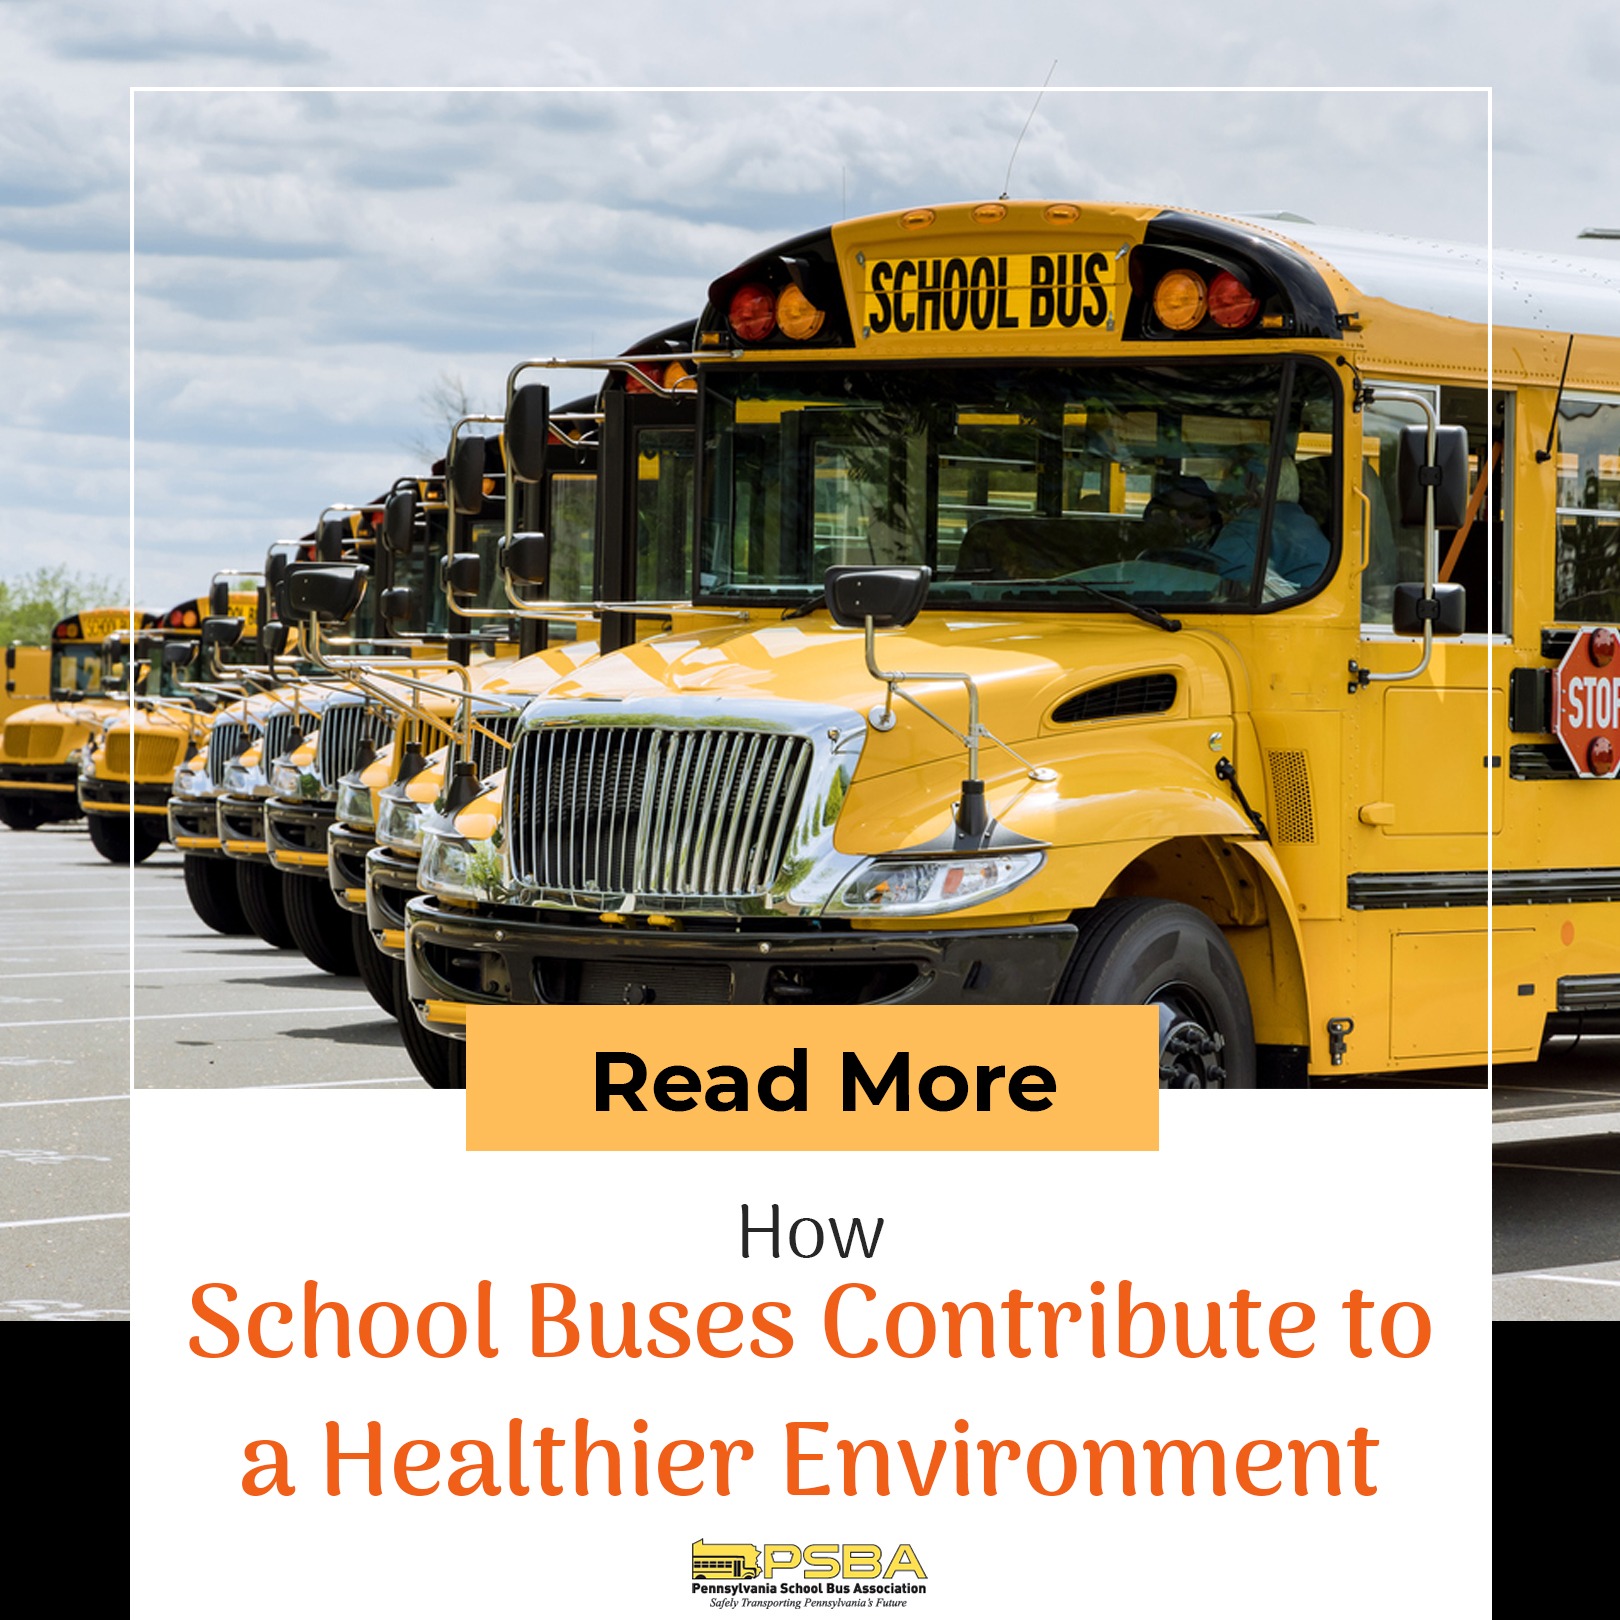 How School Buses Contribute to a Healthier Environment